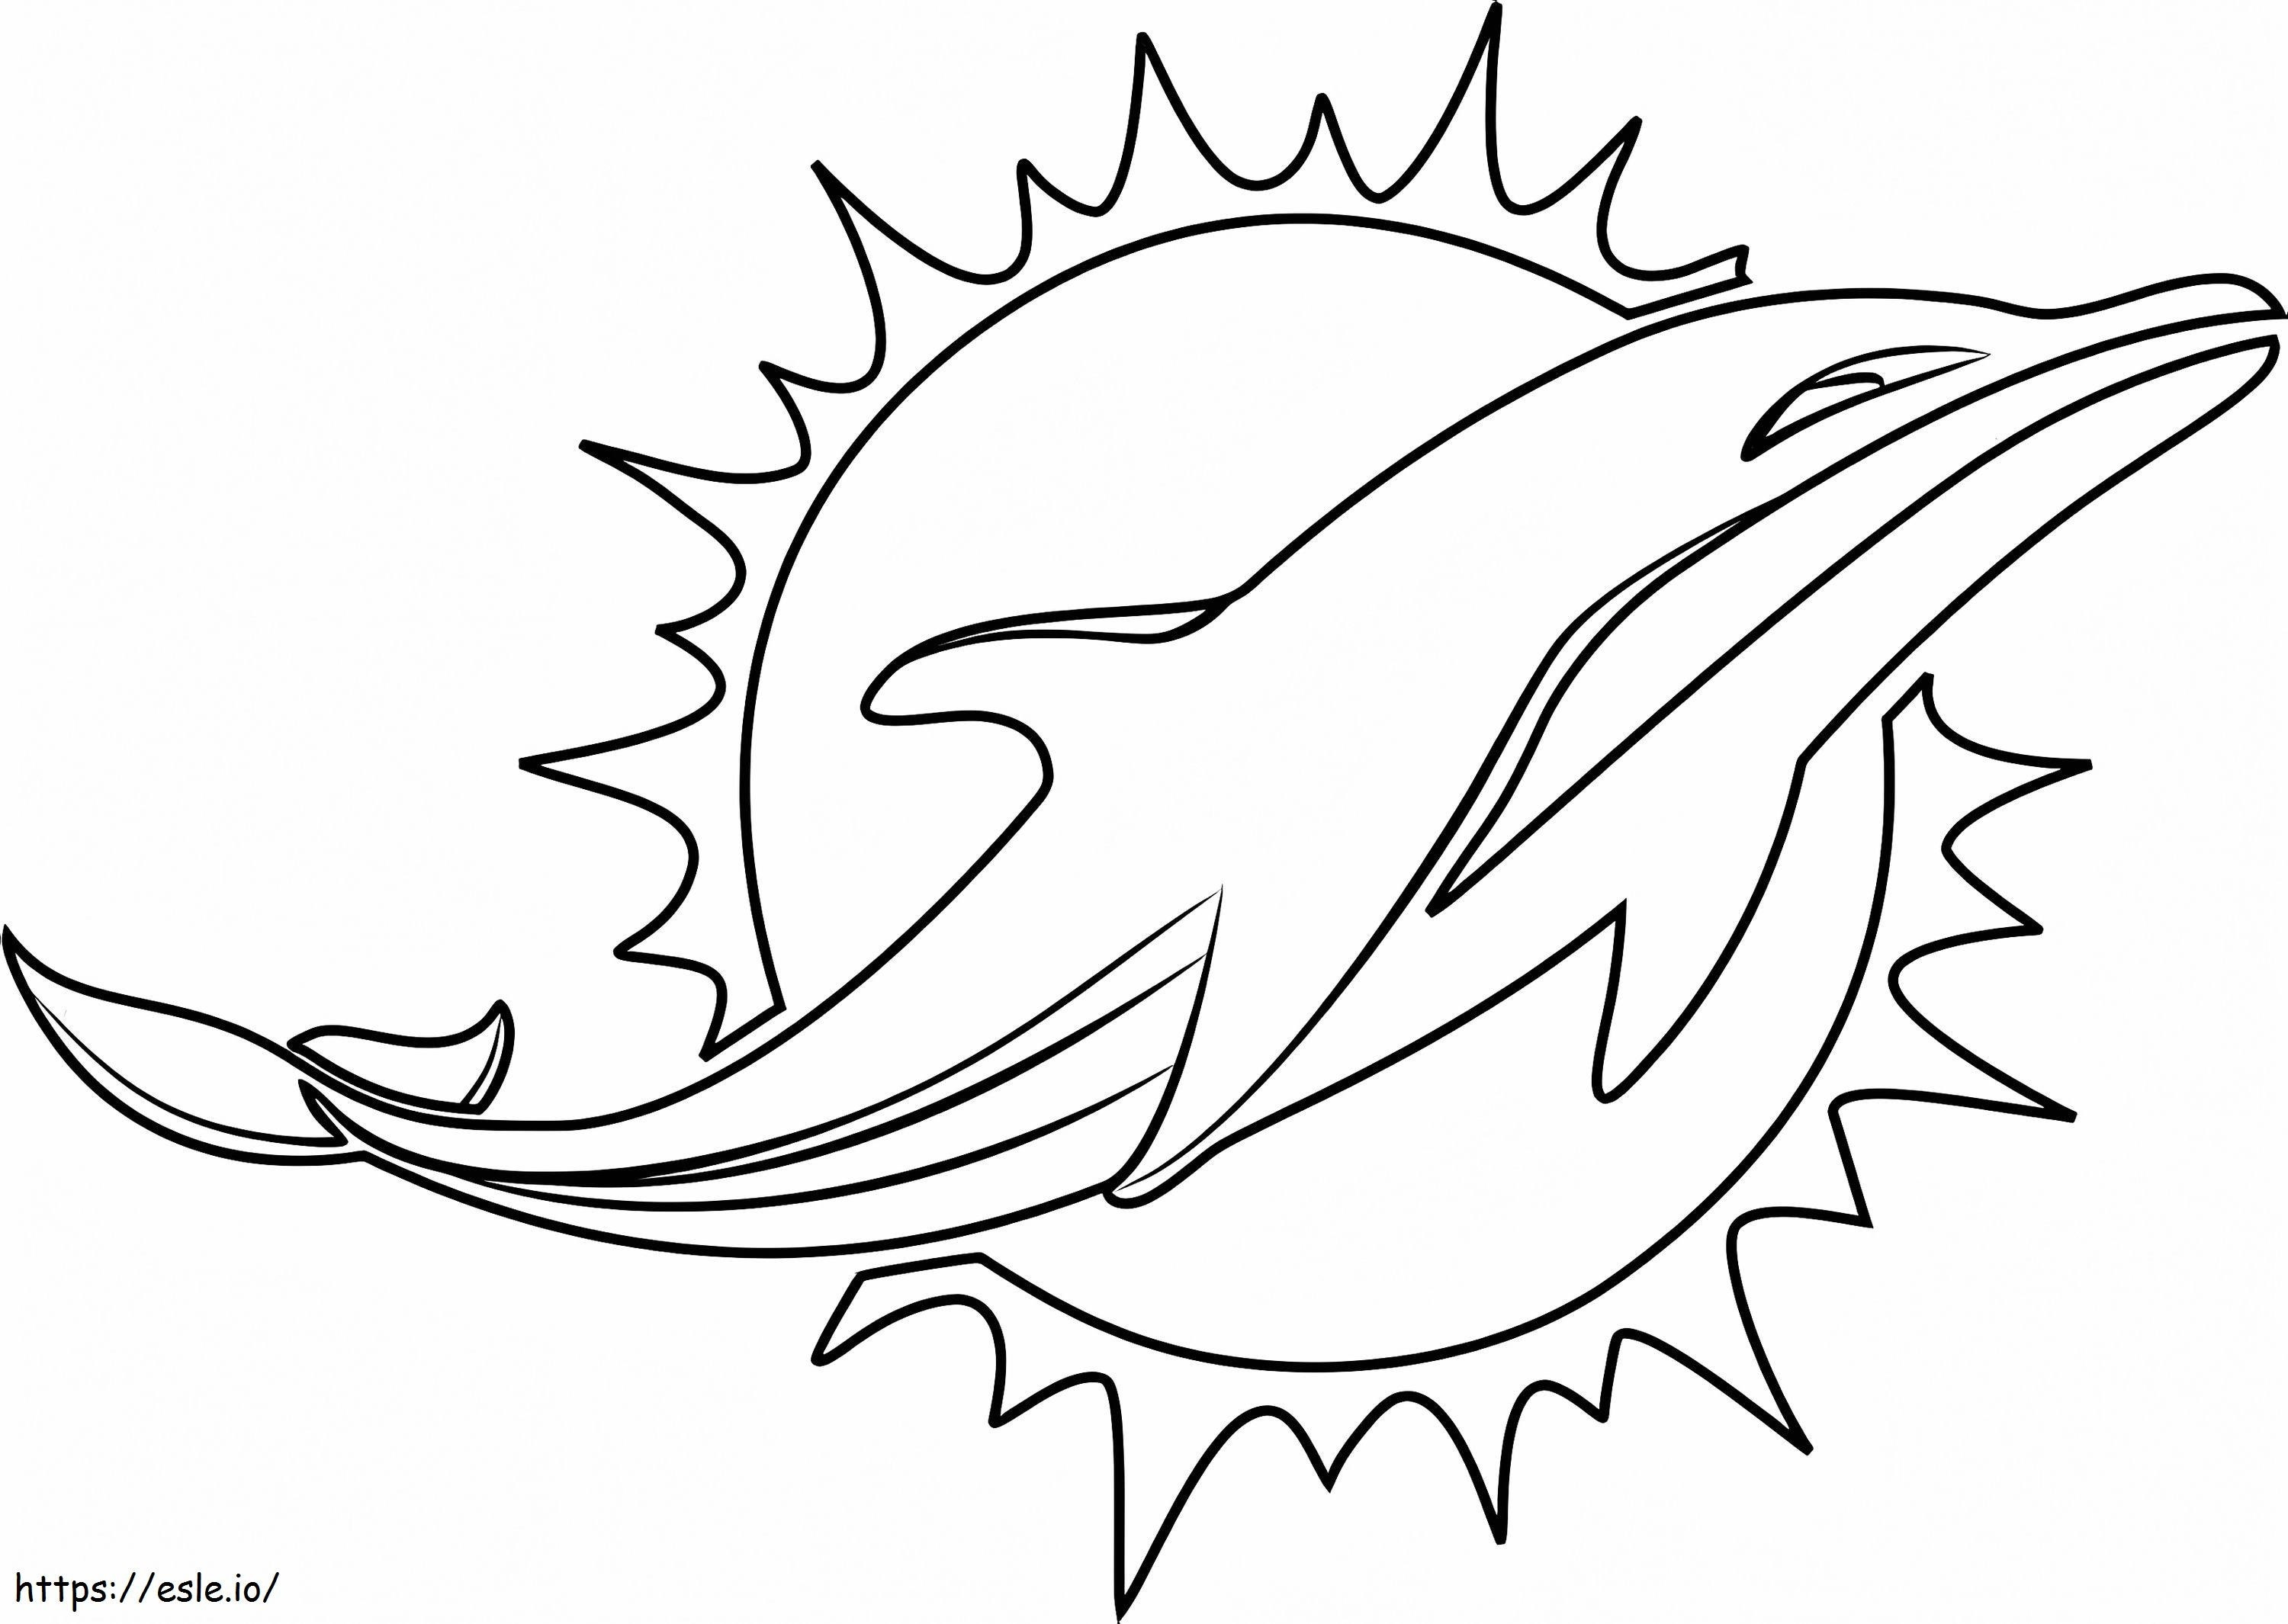 Miami Dolphins Logo coloring page